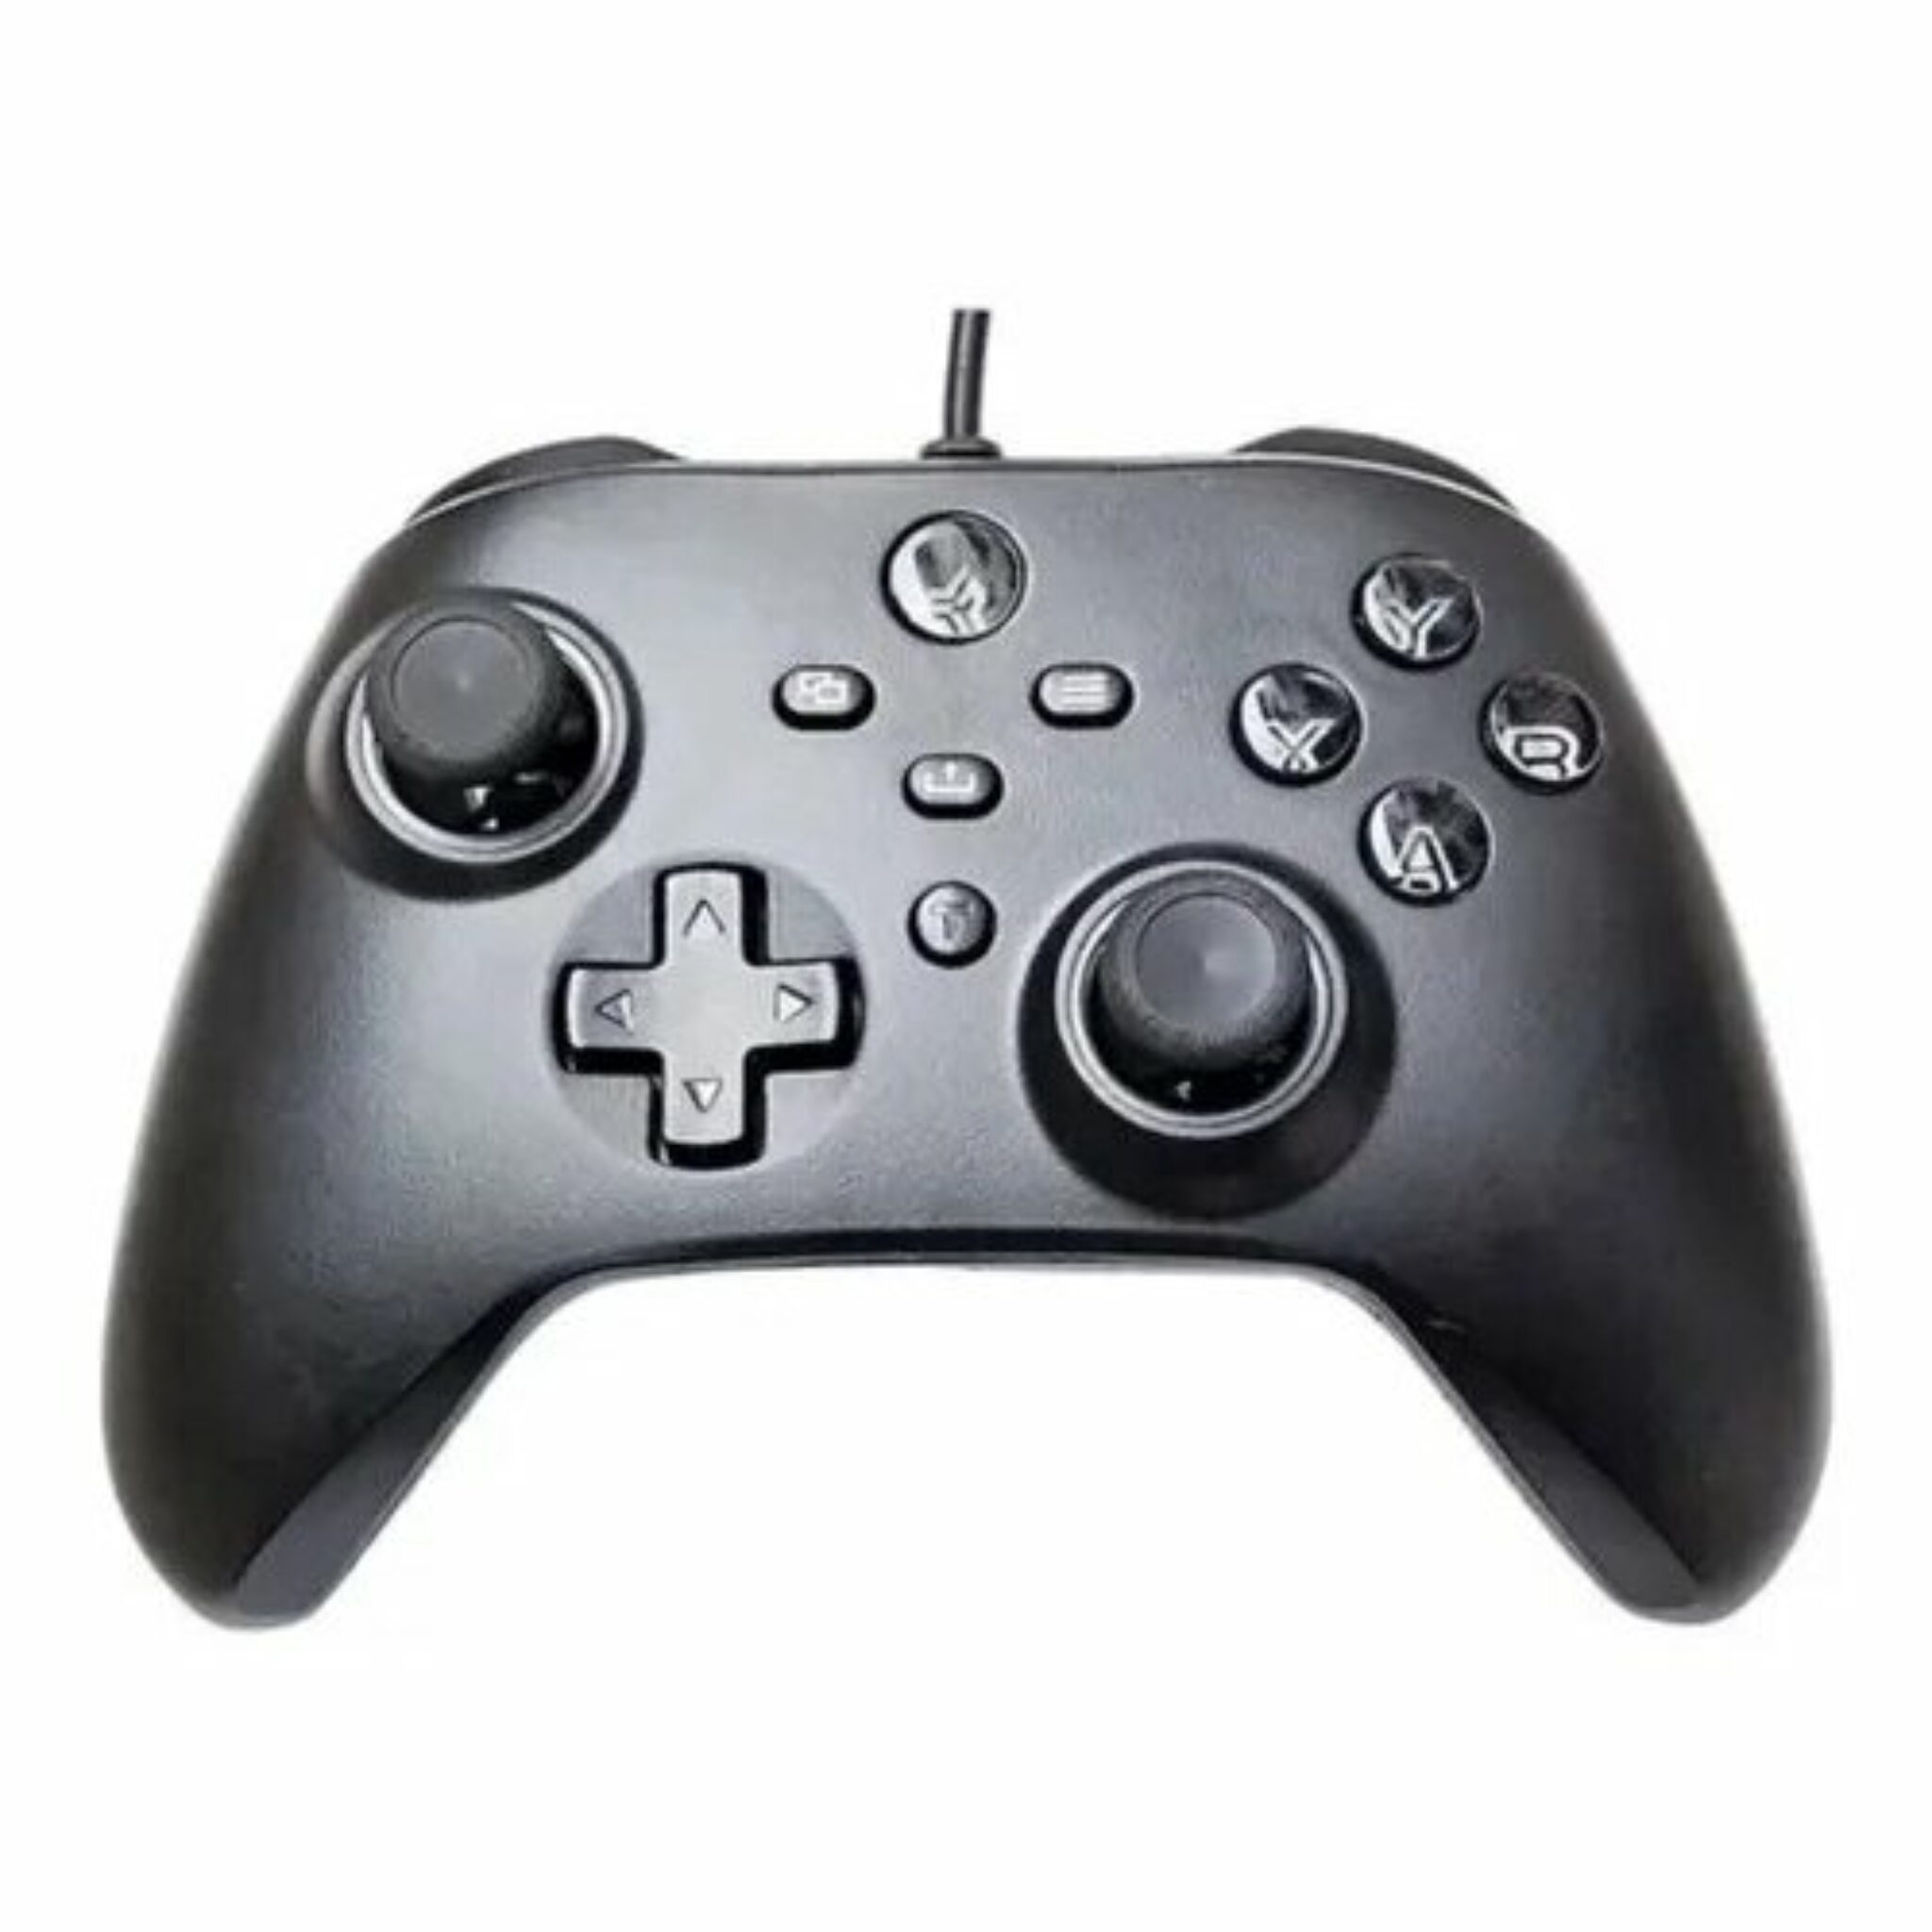 Controle Para Video Game Knup Kp Gm019